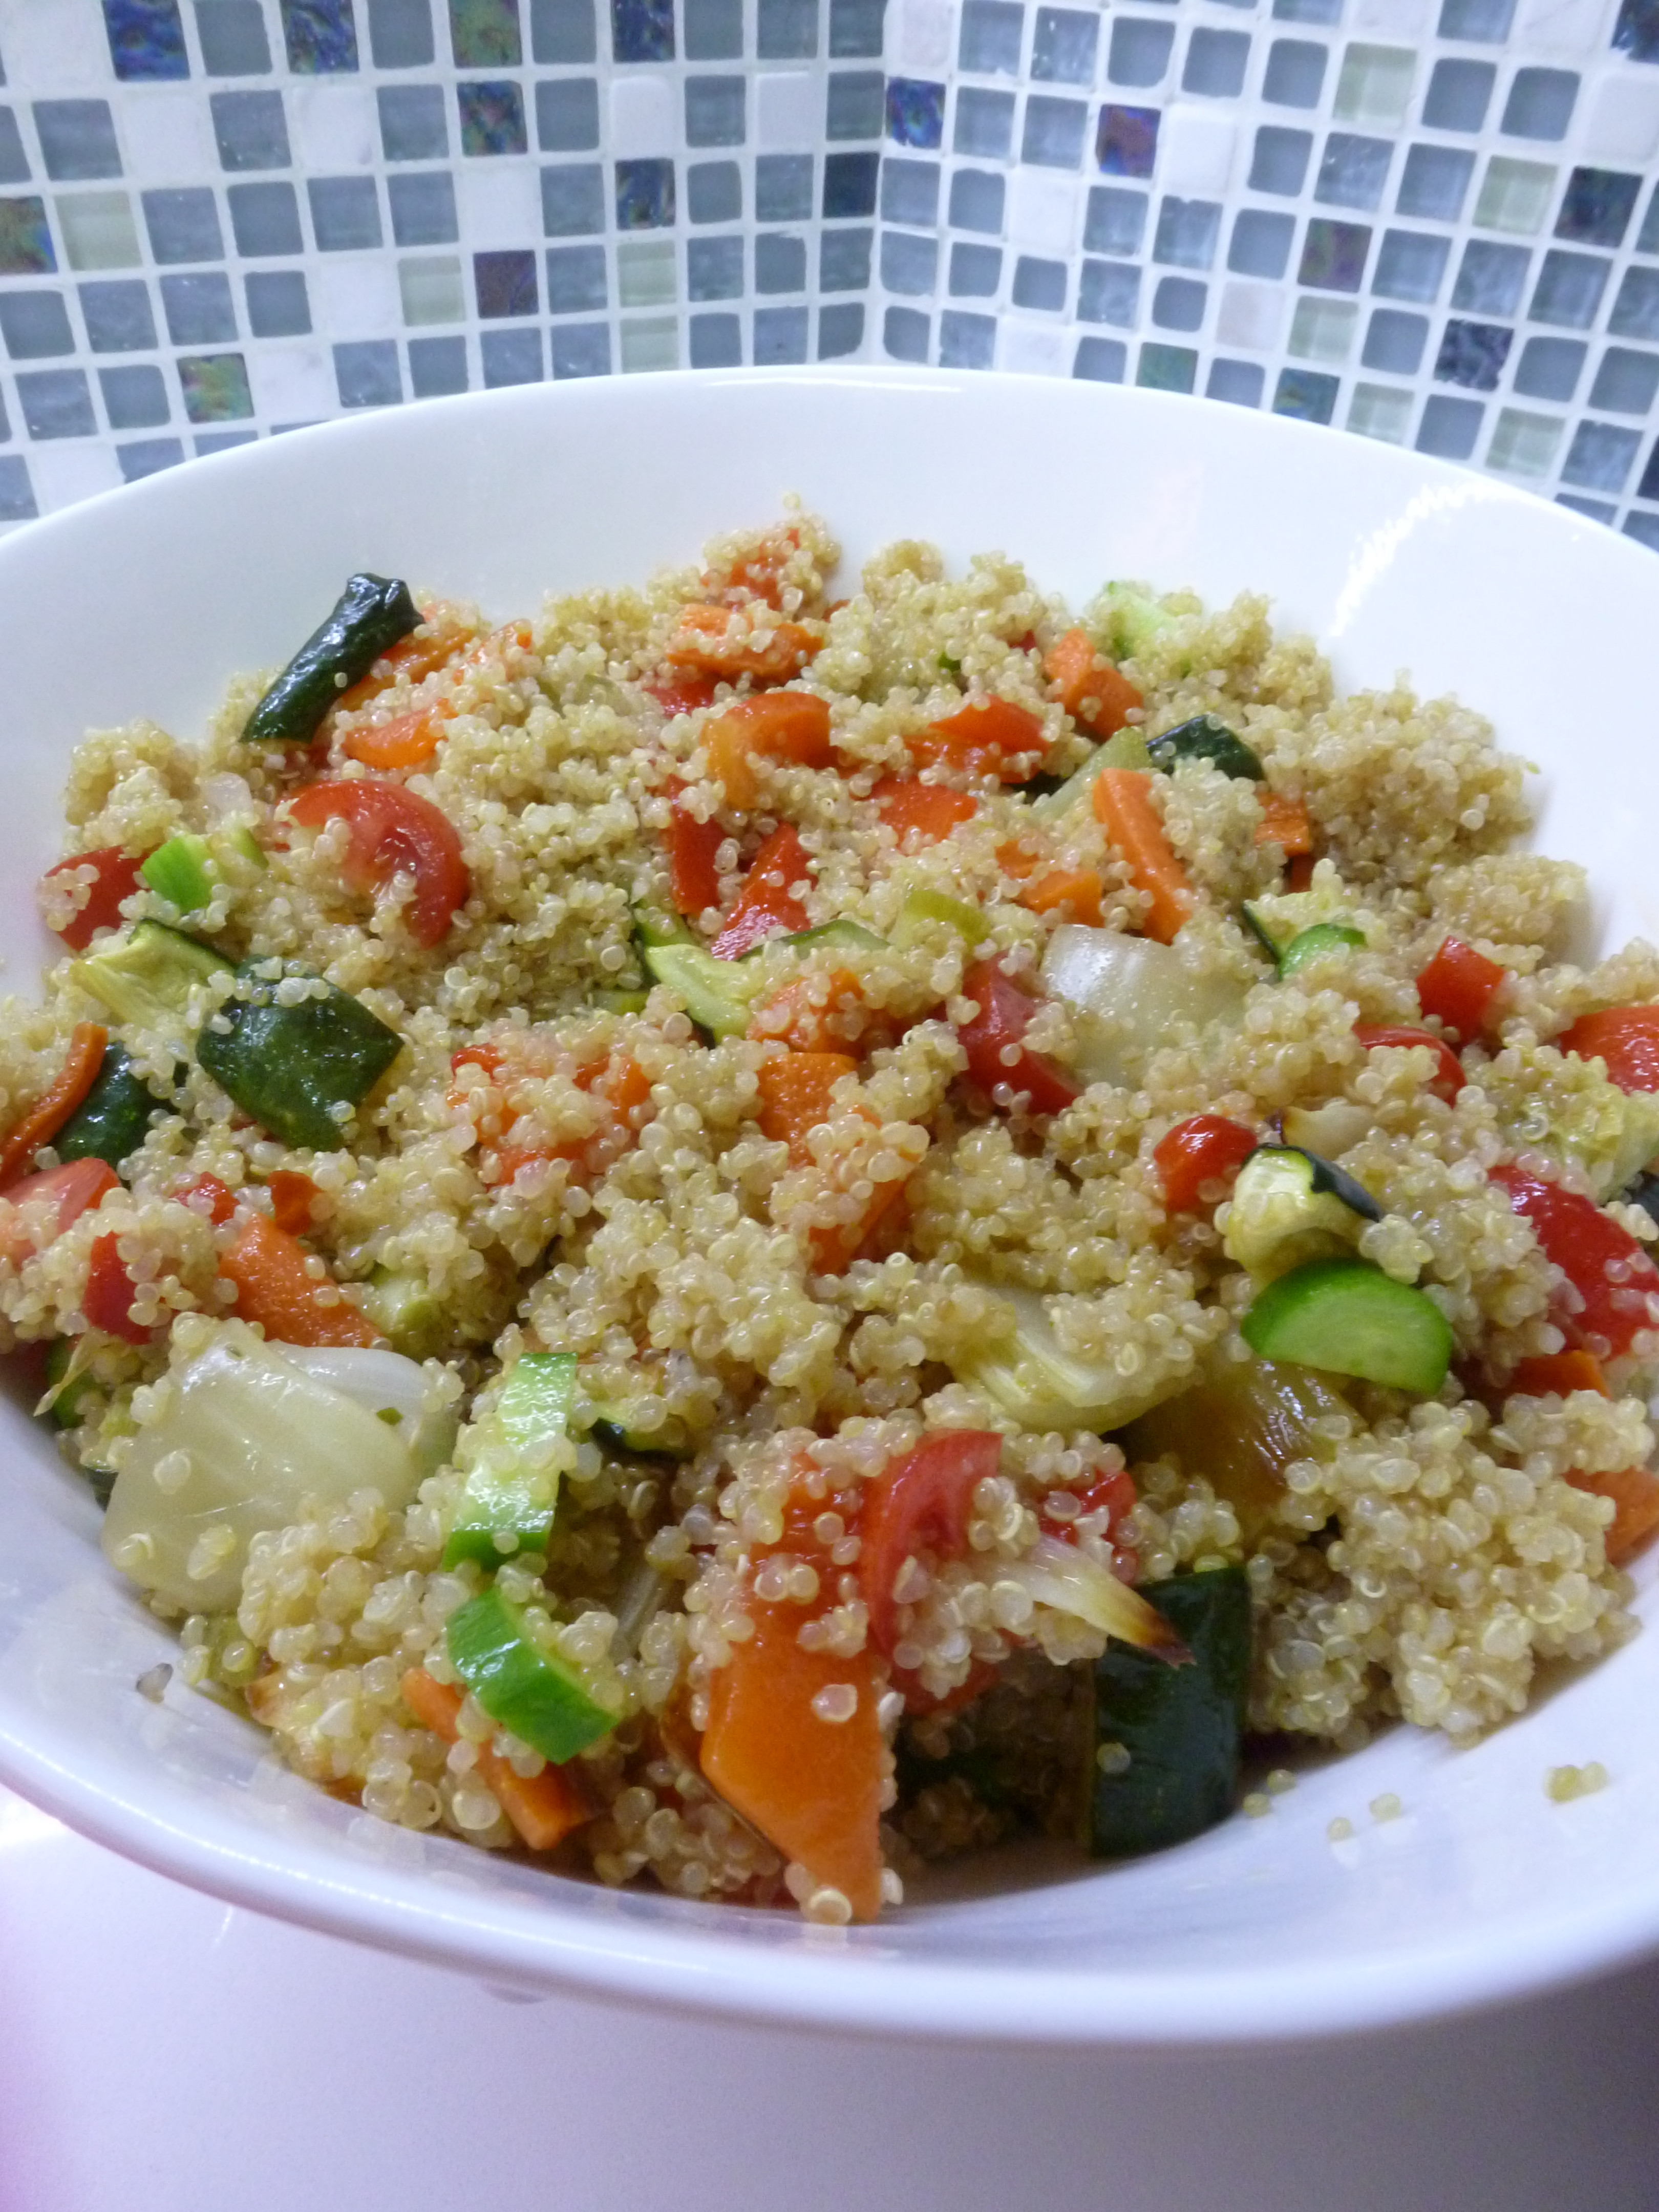 Passover Quinoa Recipe
 Roasted Ve able and Quinoa Salad with Citrus Dressing